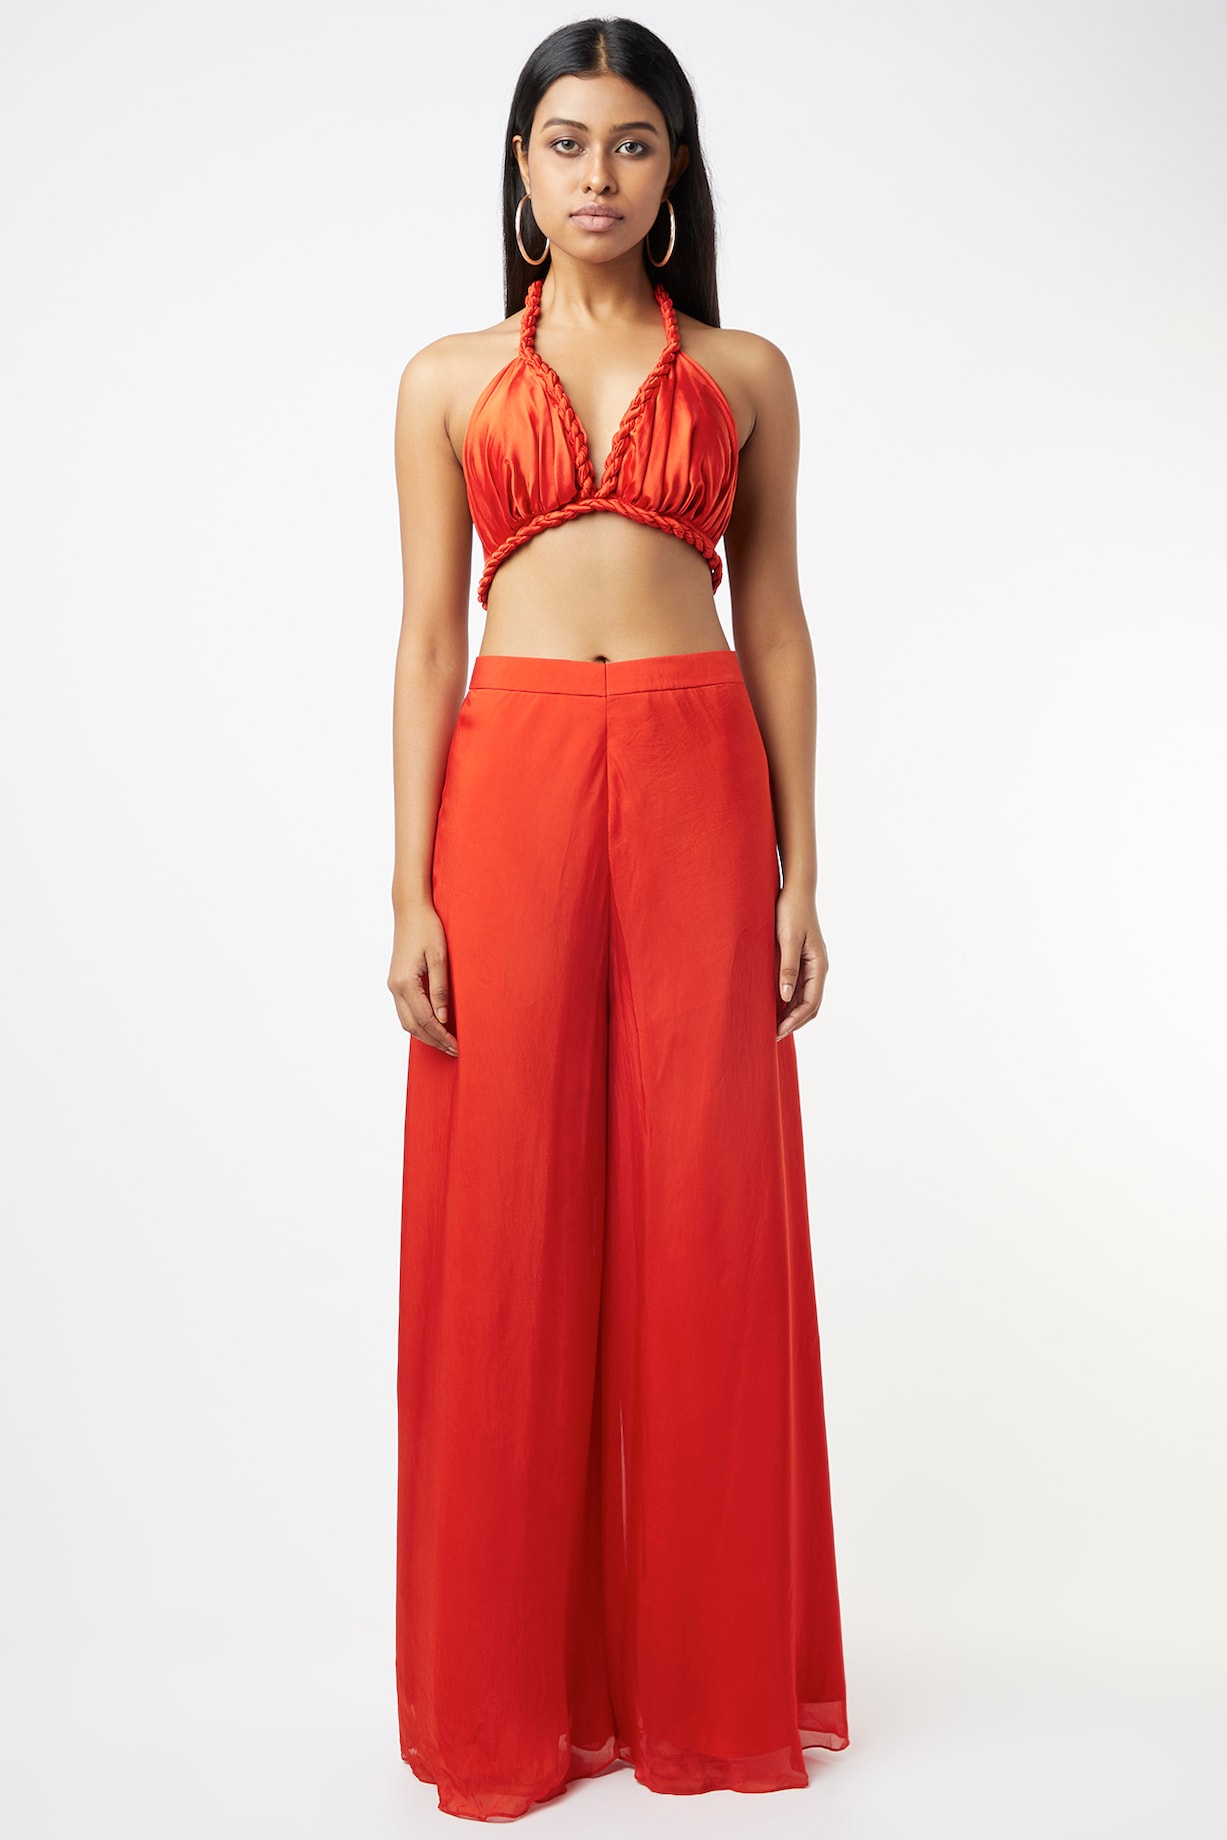 Tangerine Satin Palazzo Pant Set With Cape Design by Deme by